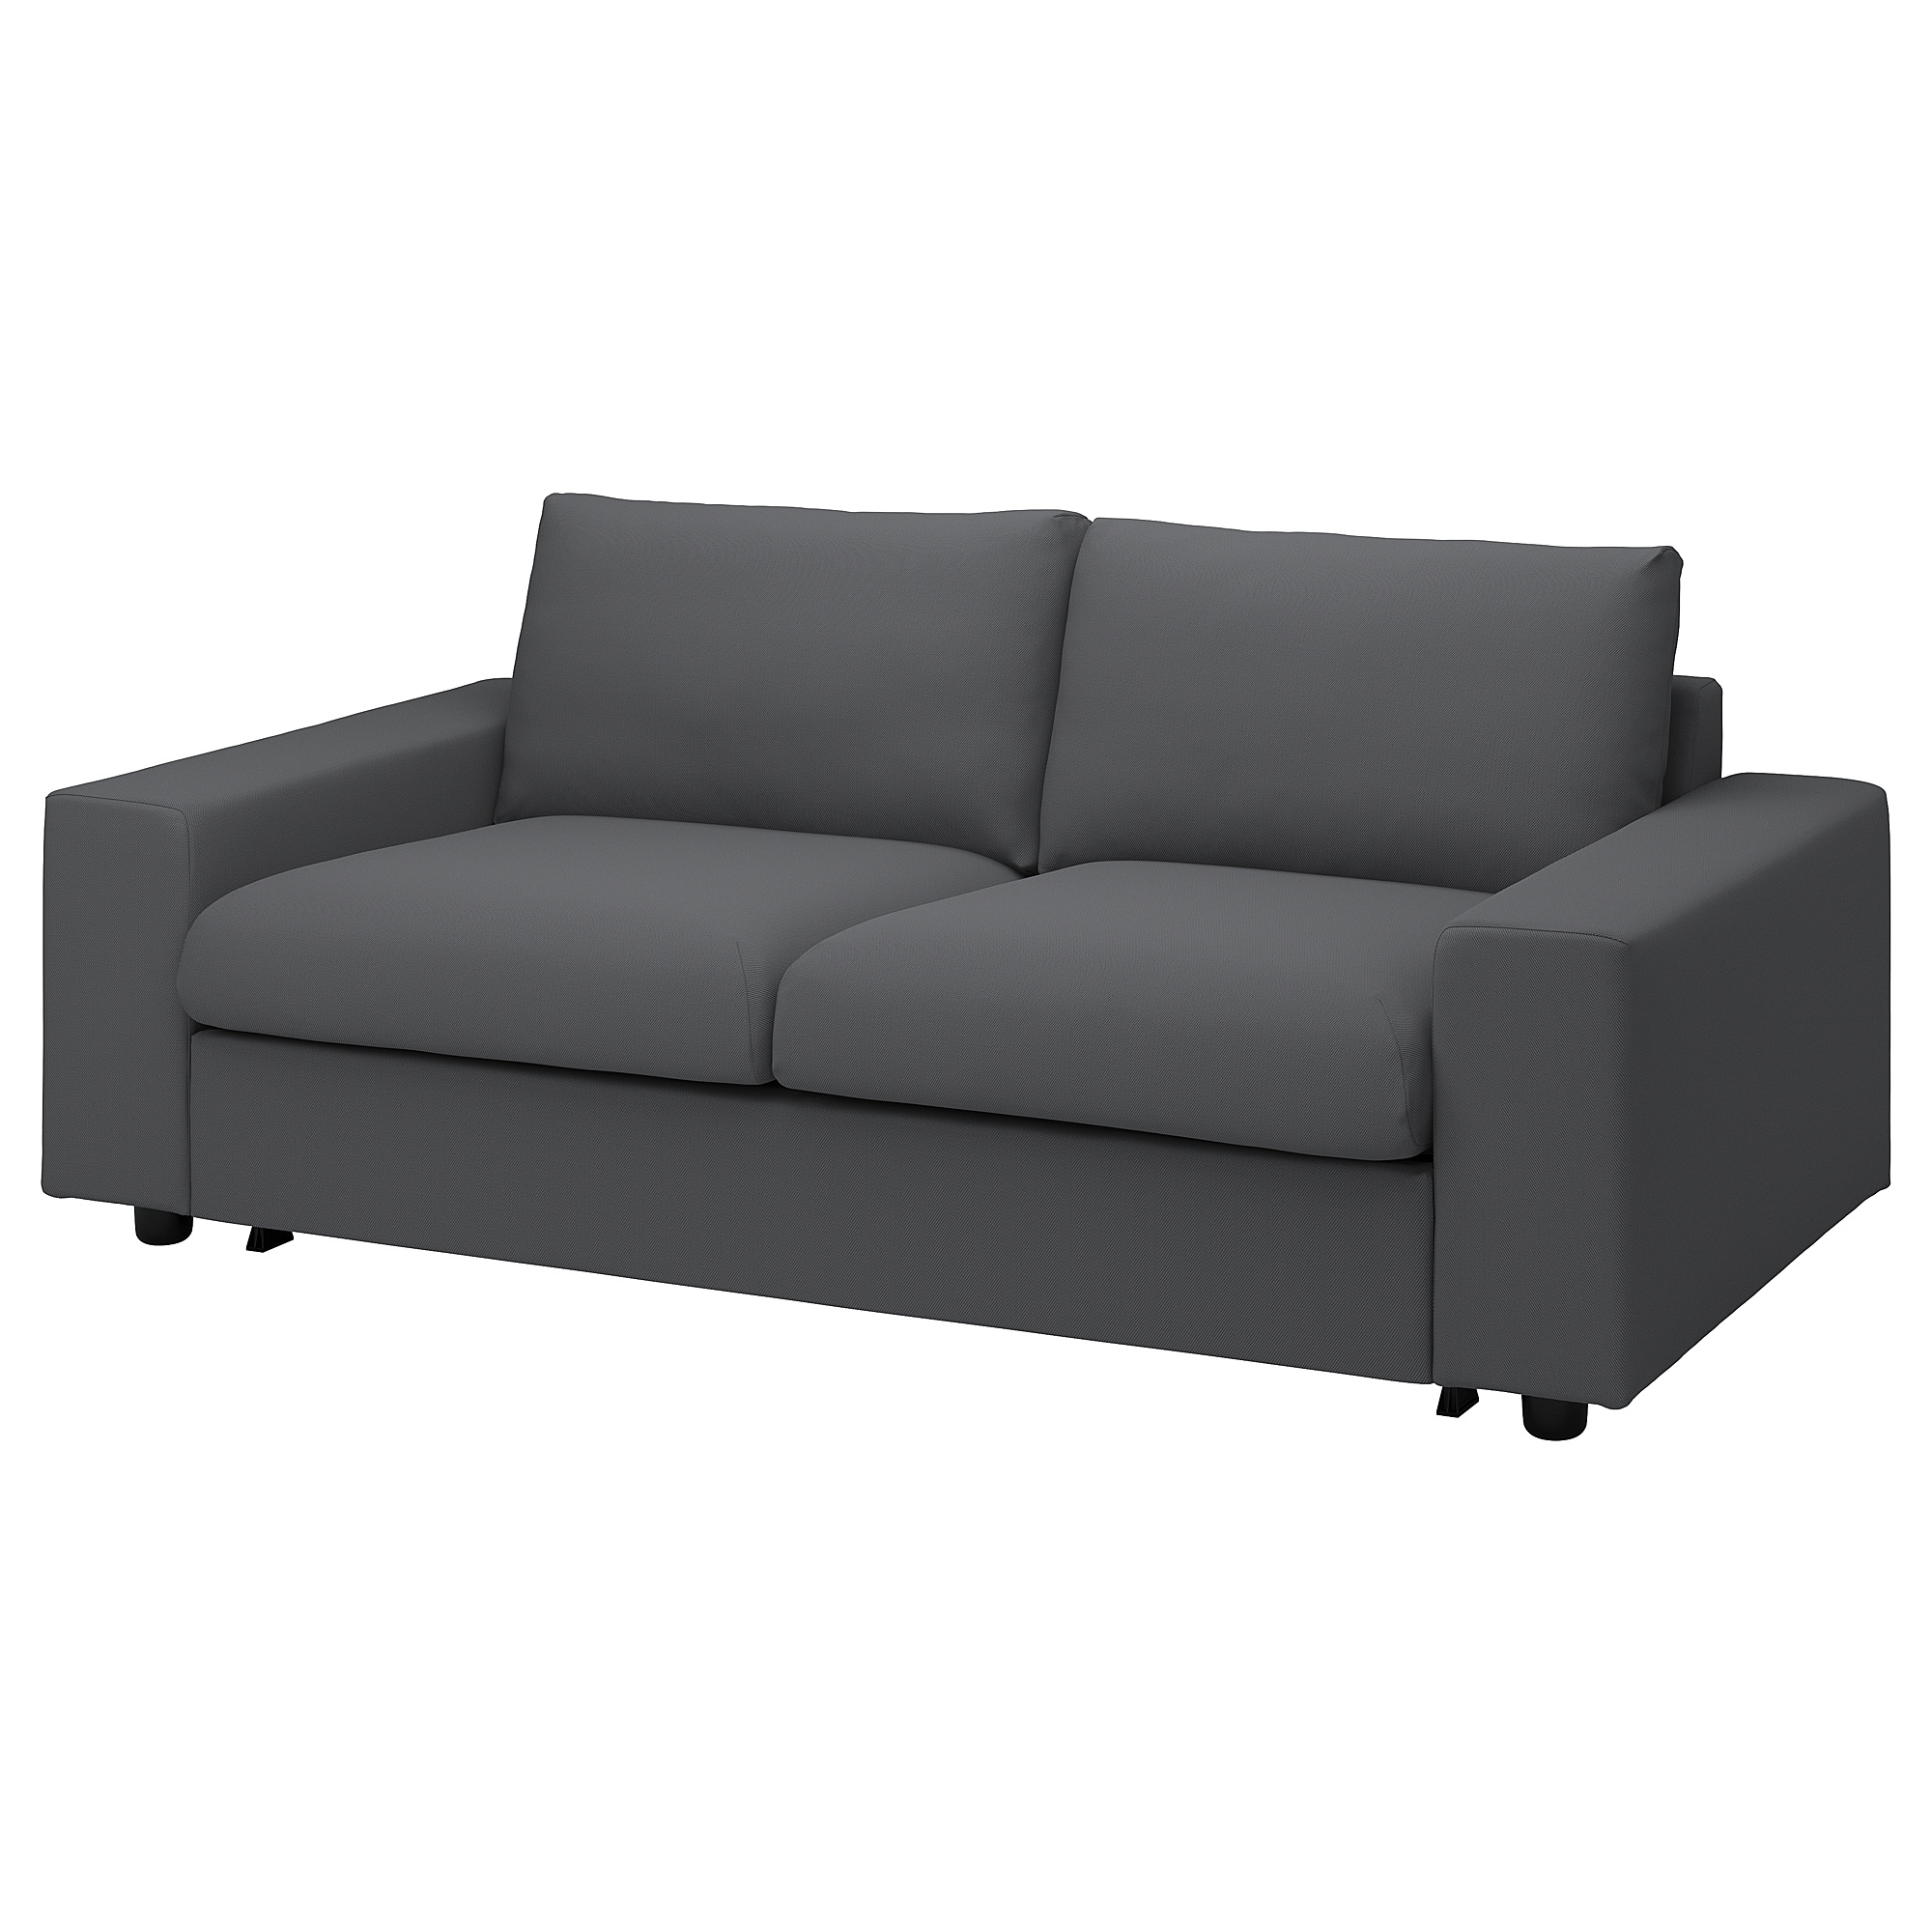 VIMLE cover for 2-seat sofa-bed